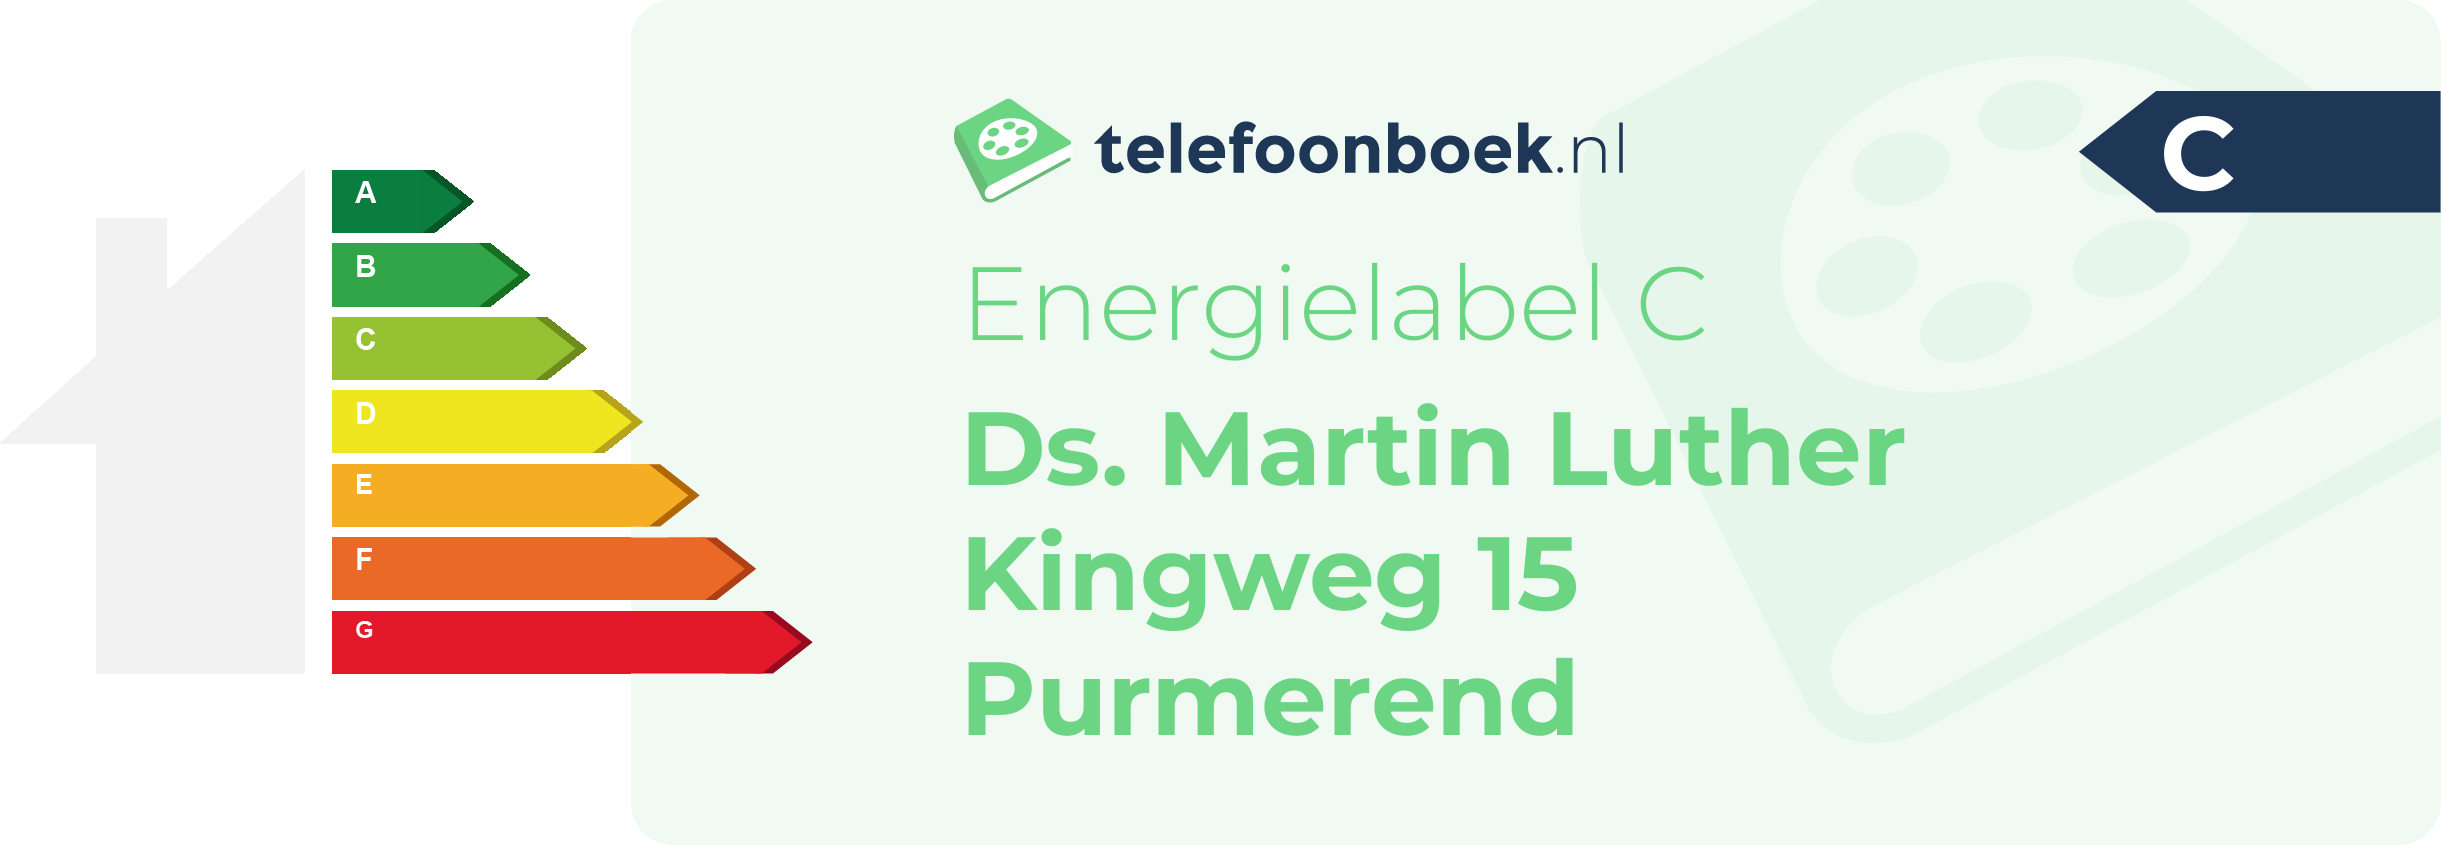 Energielabel Ds. Martin Luther Kingweg 15 Purmerend